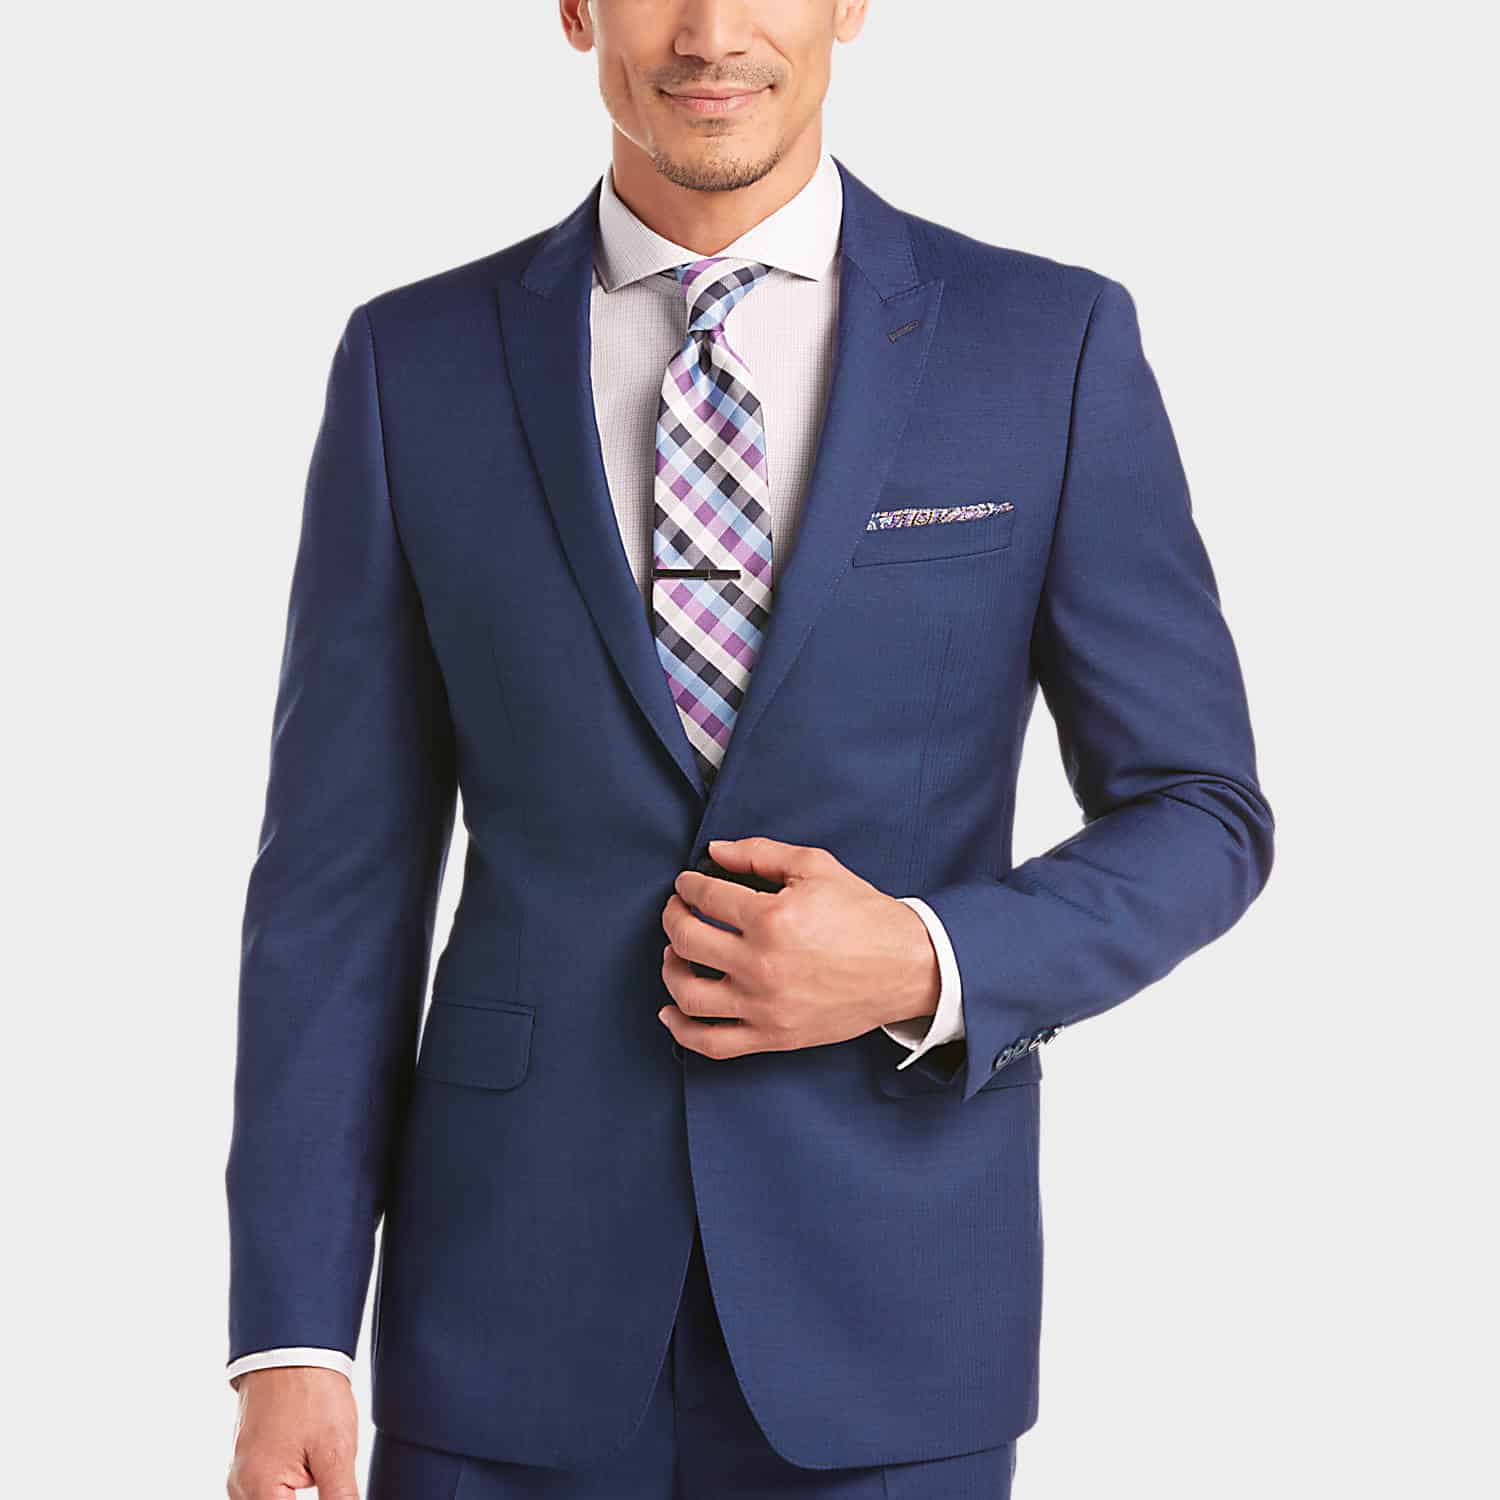 Fitted - types of suits